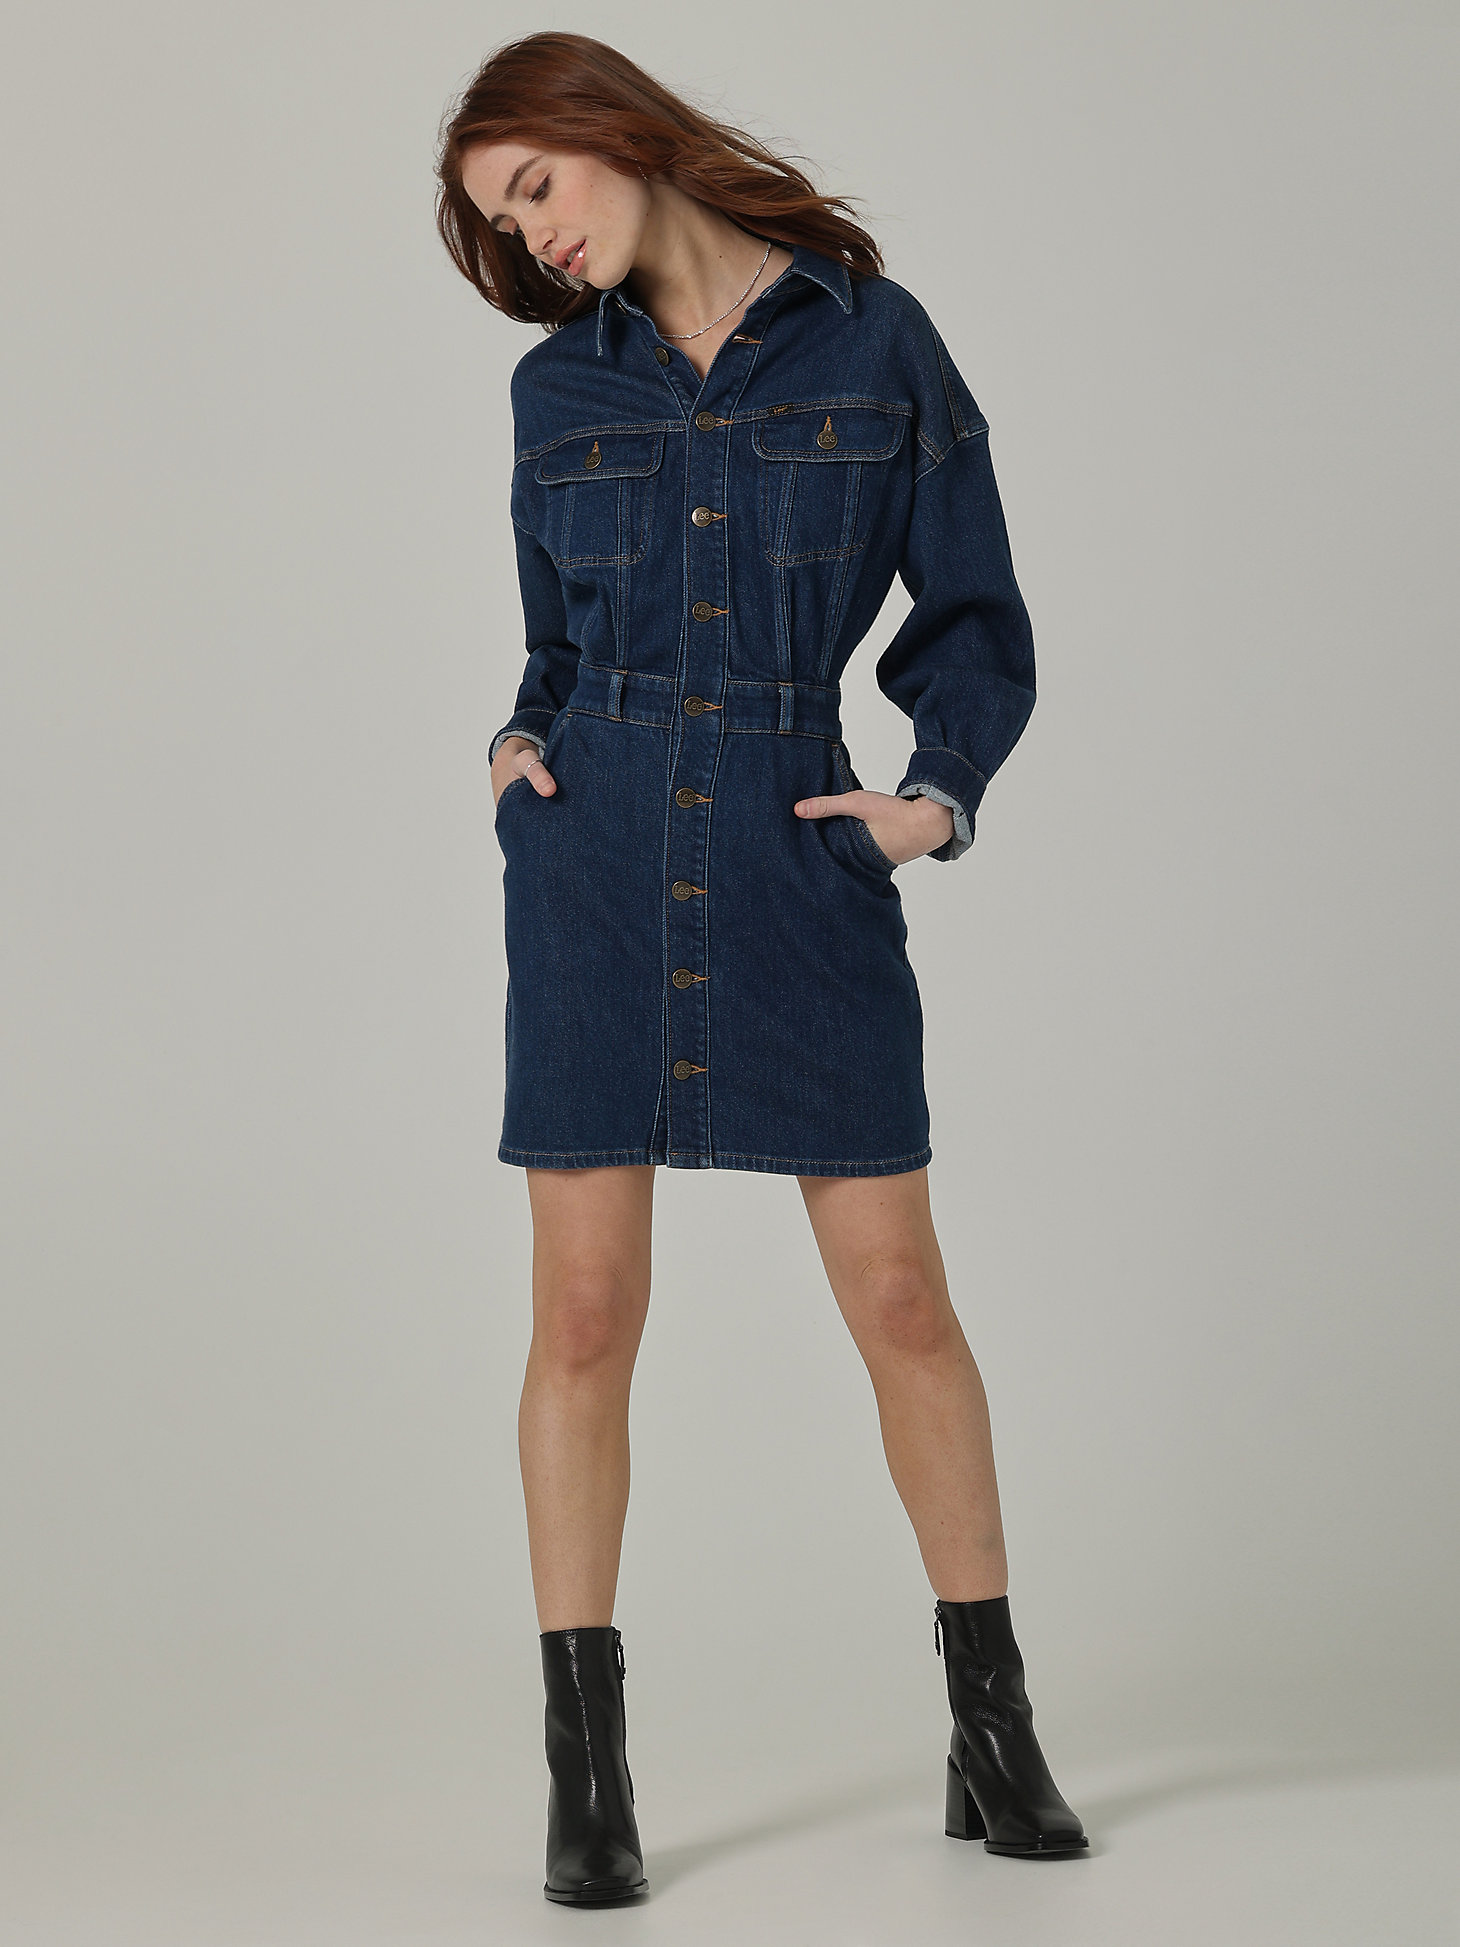 Women's Lee European Collection Dropped Shoulder Button Down Dress in Greater Blue alternative view 4